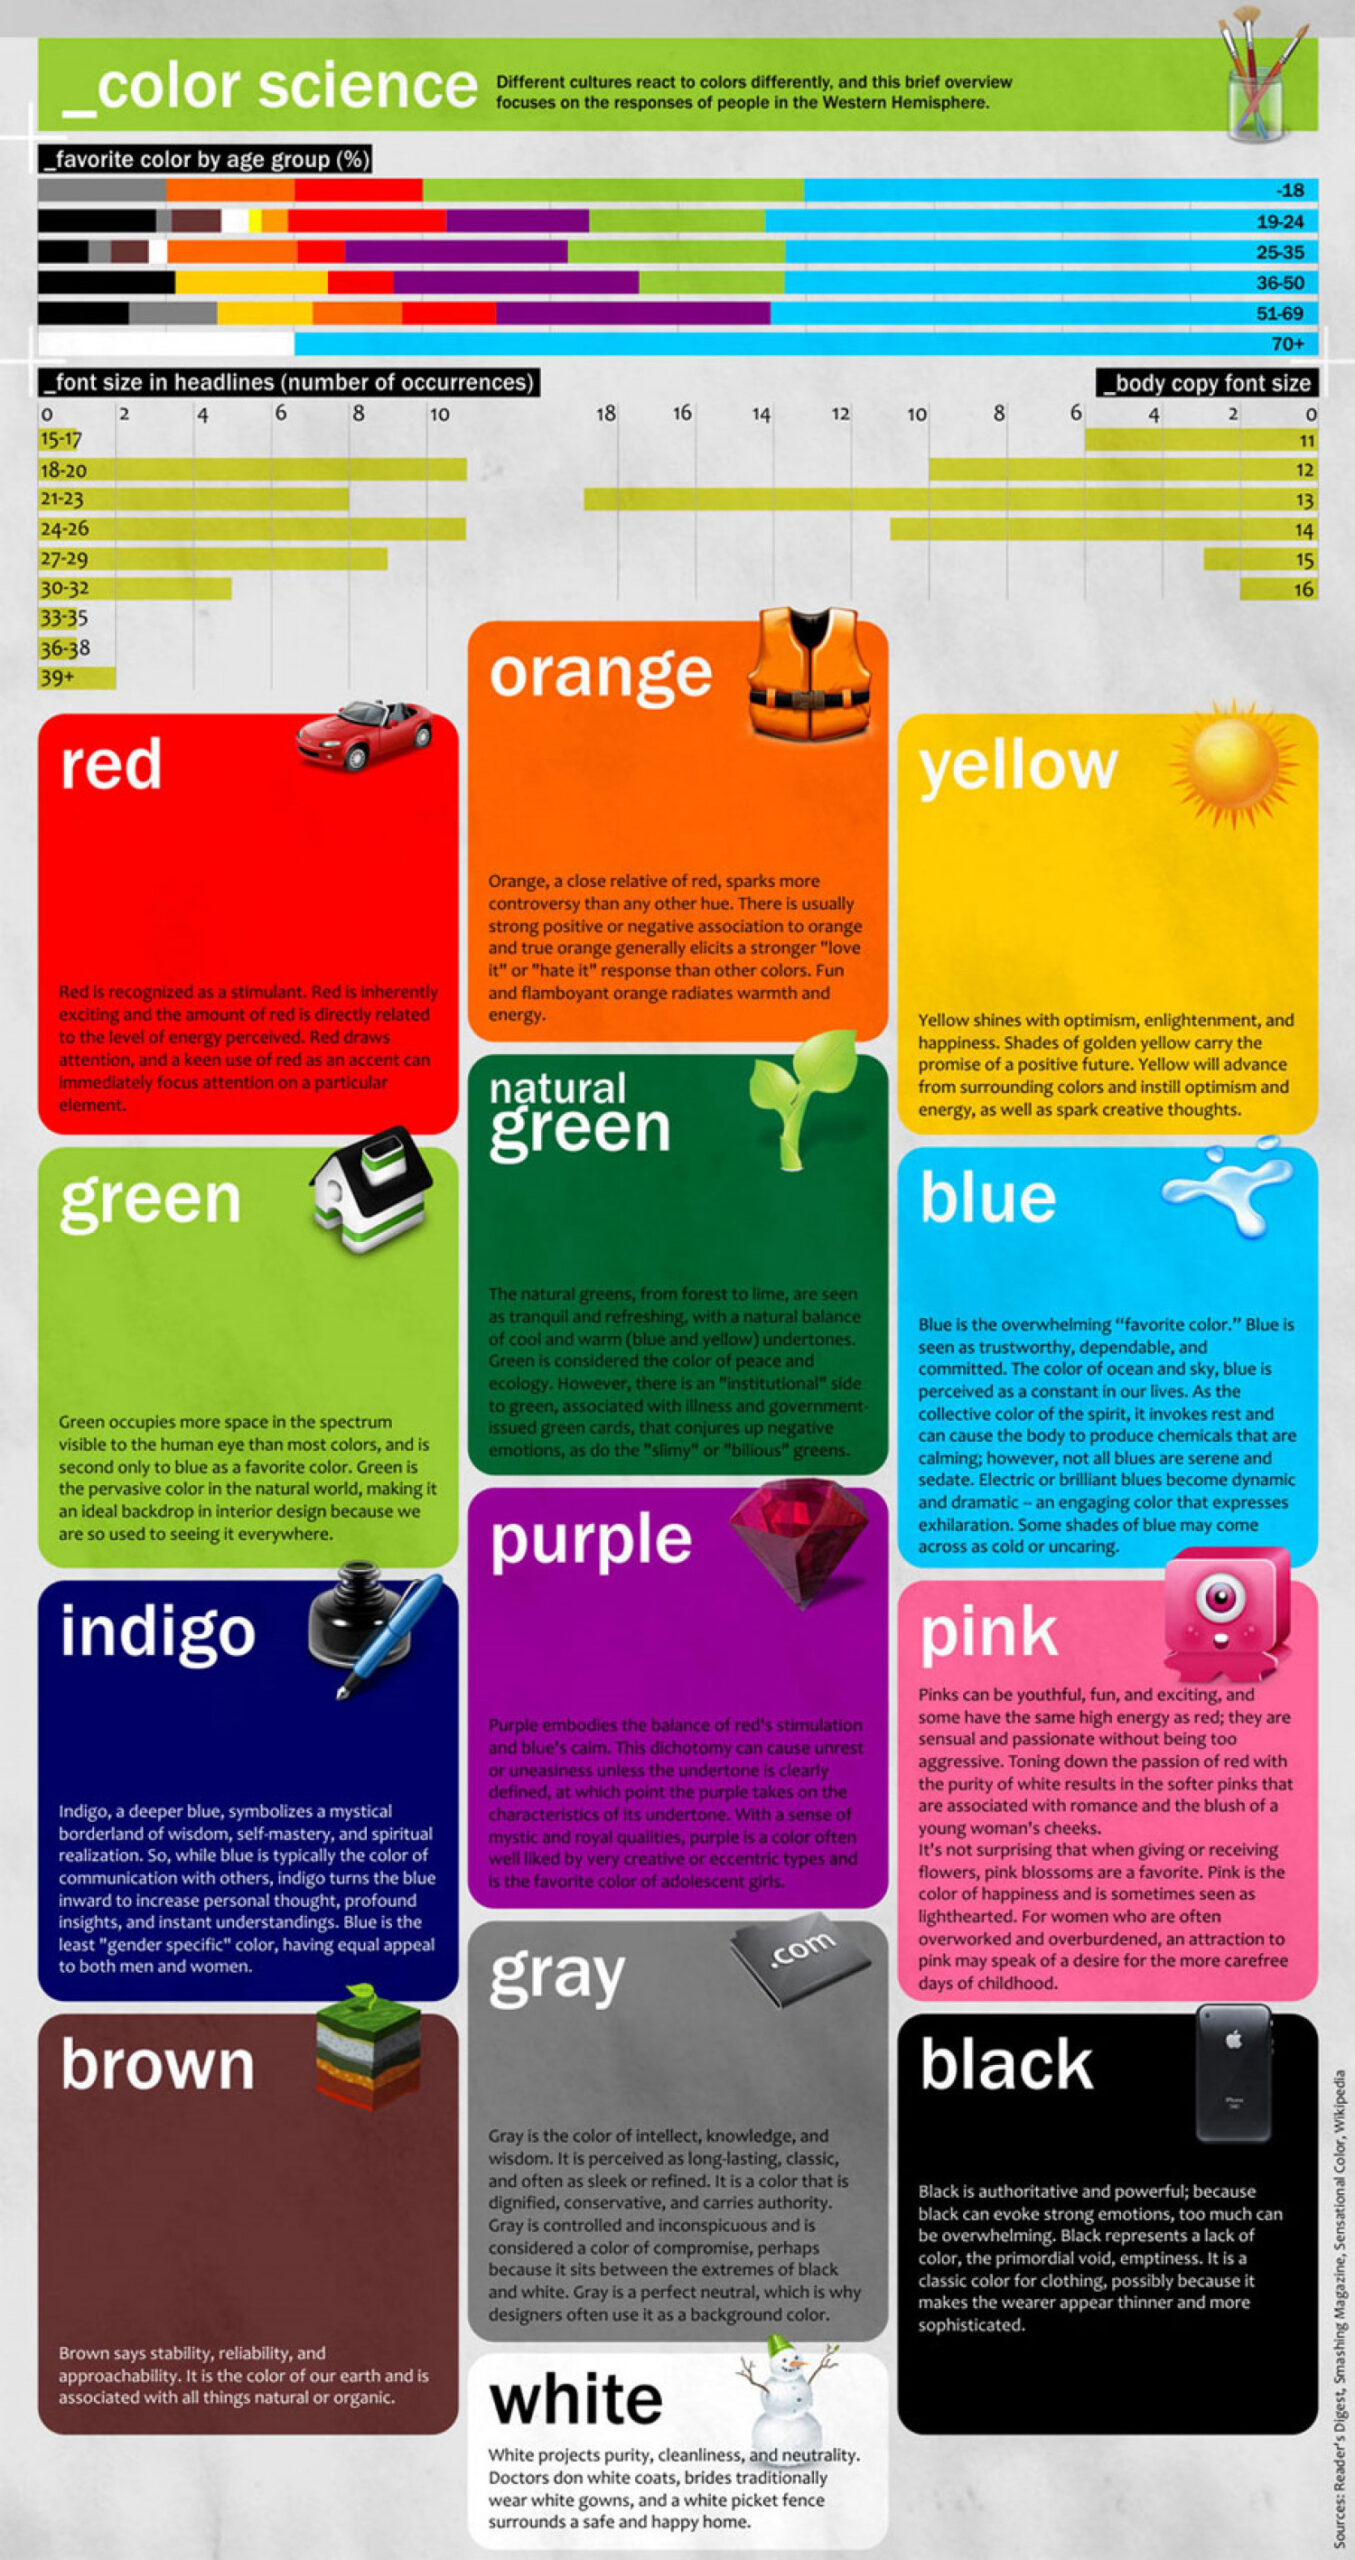 THE INFLUENCE OF COLOR INFOGRAPHIC | Yellow Duck Marketing